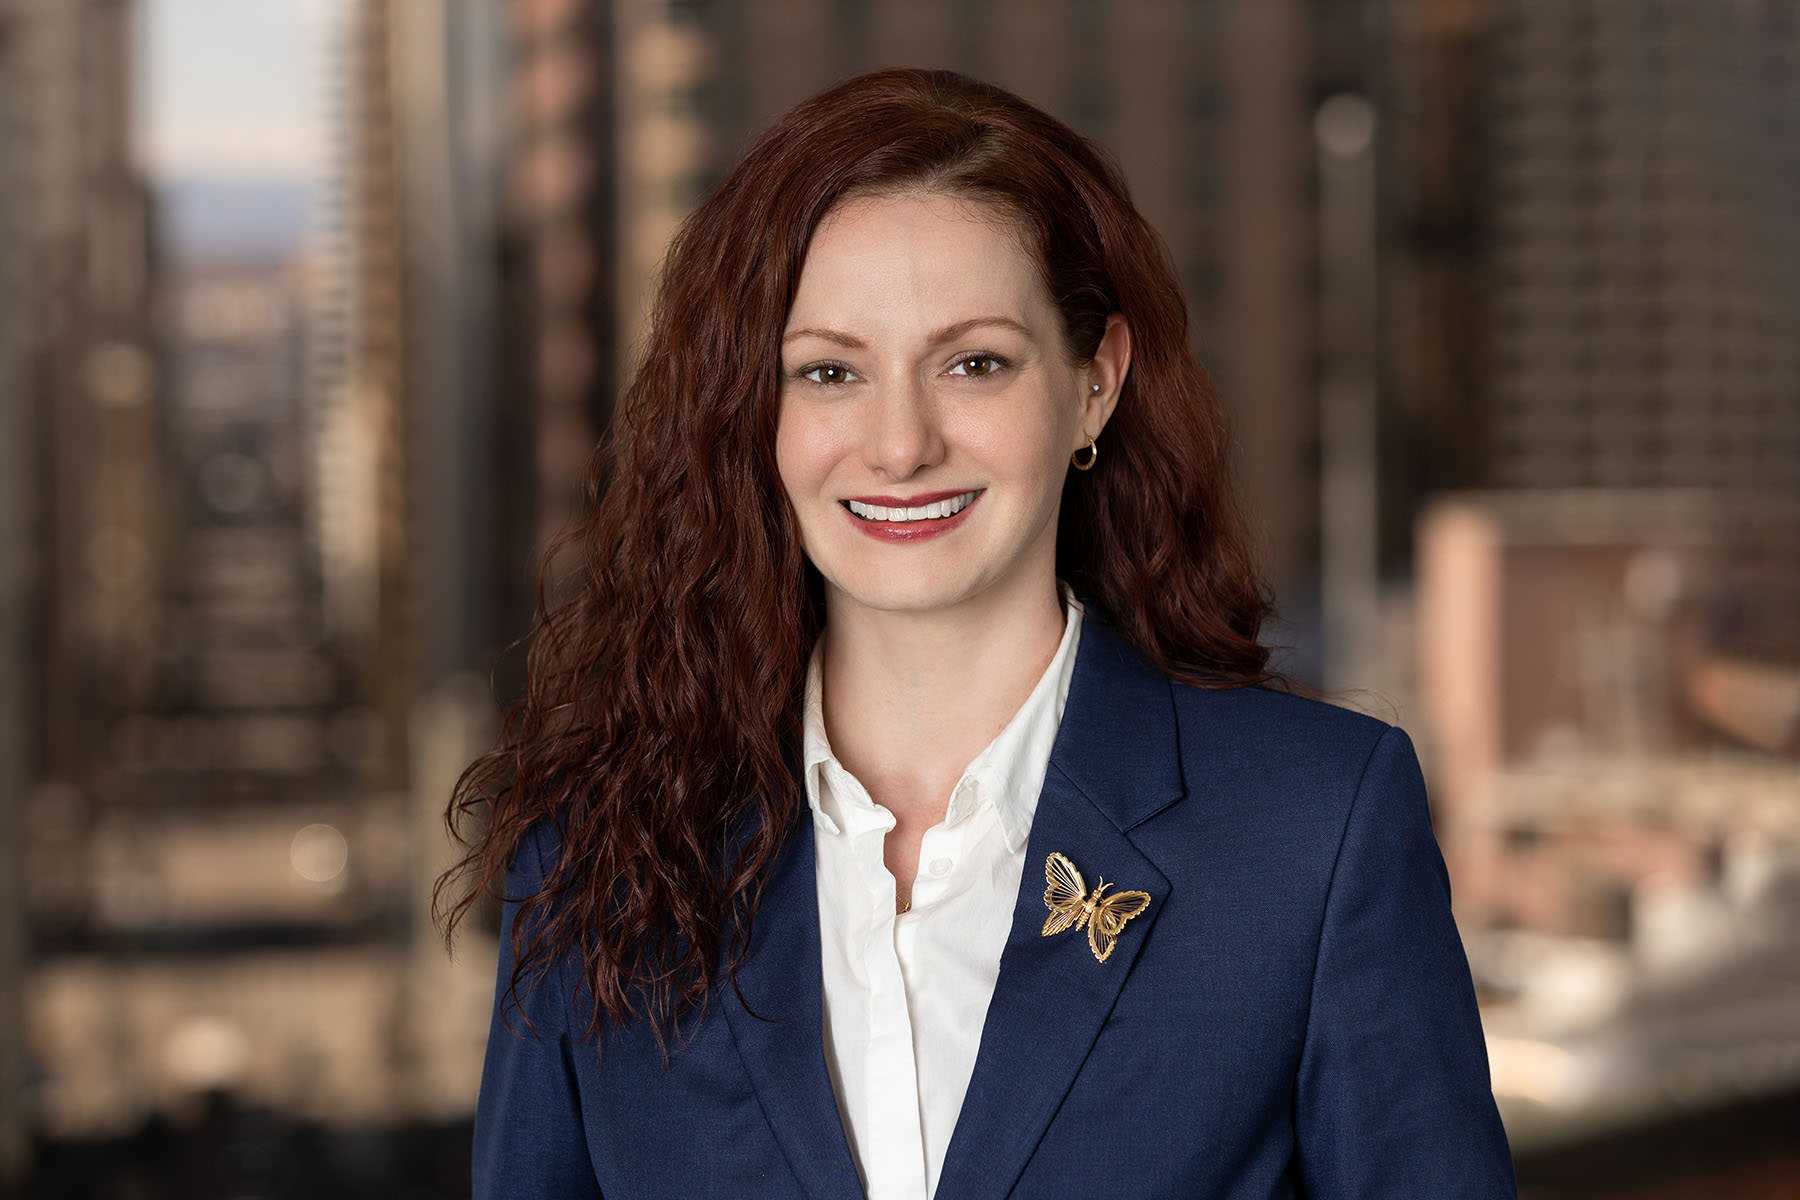 Professional woman with red hair and a navy blazer smiling against a cityscape background in her Denver headshots.